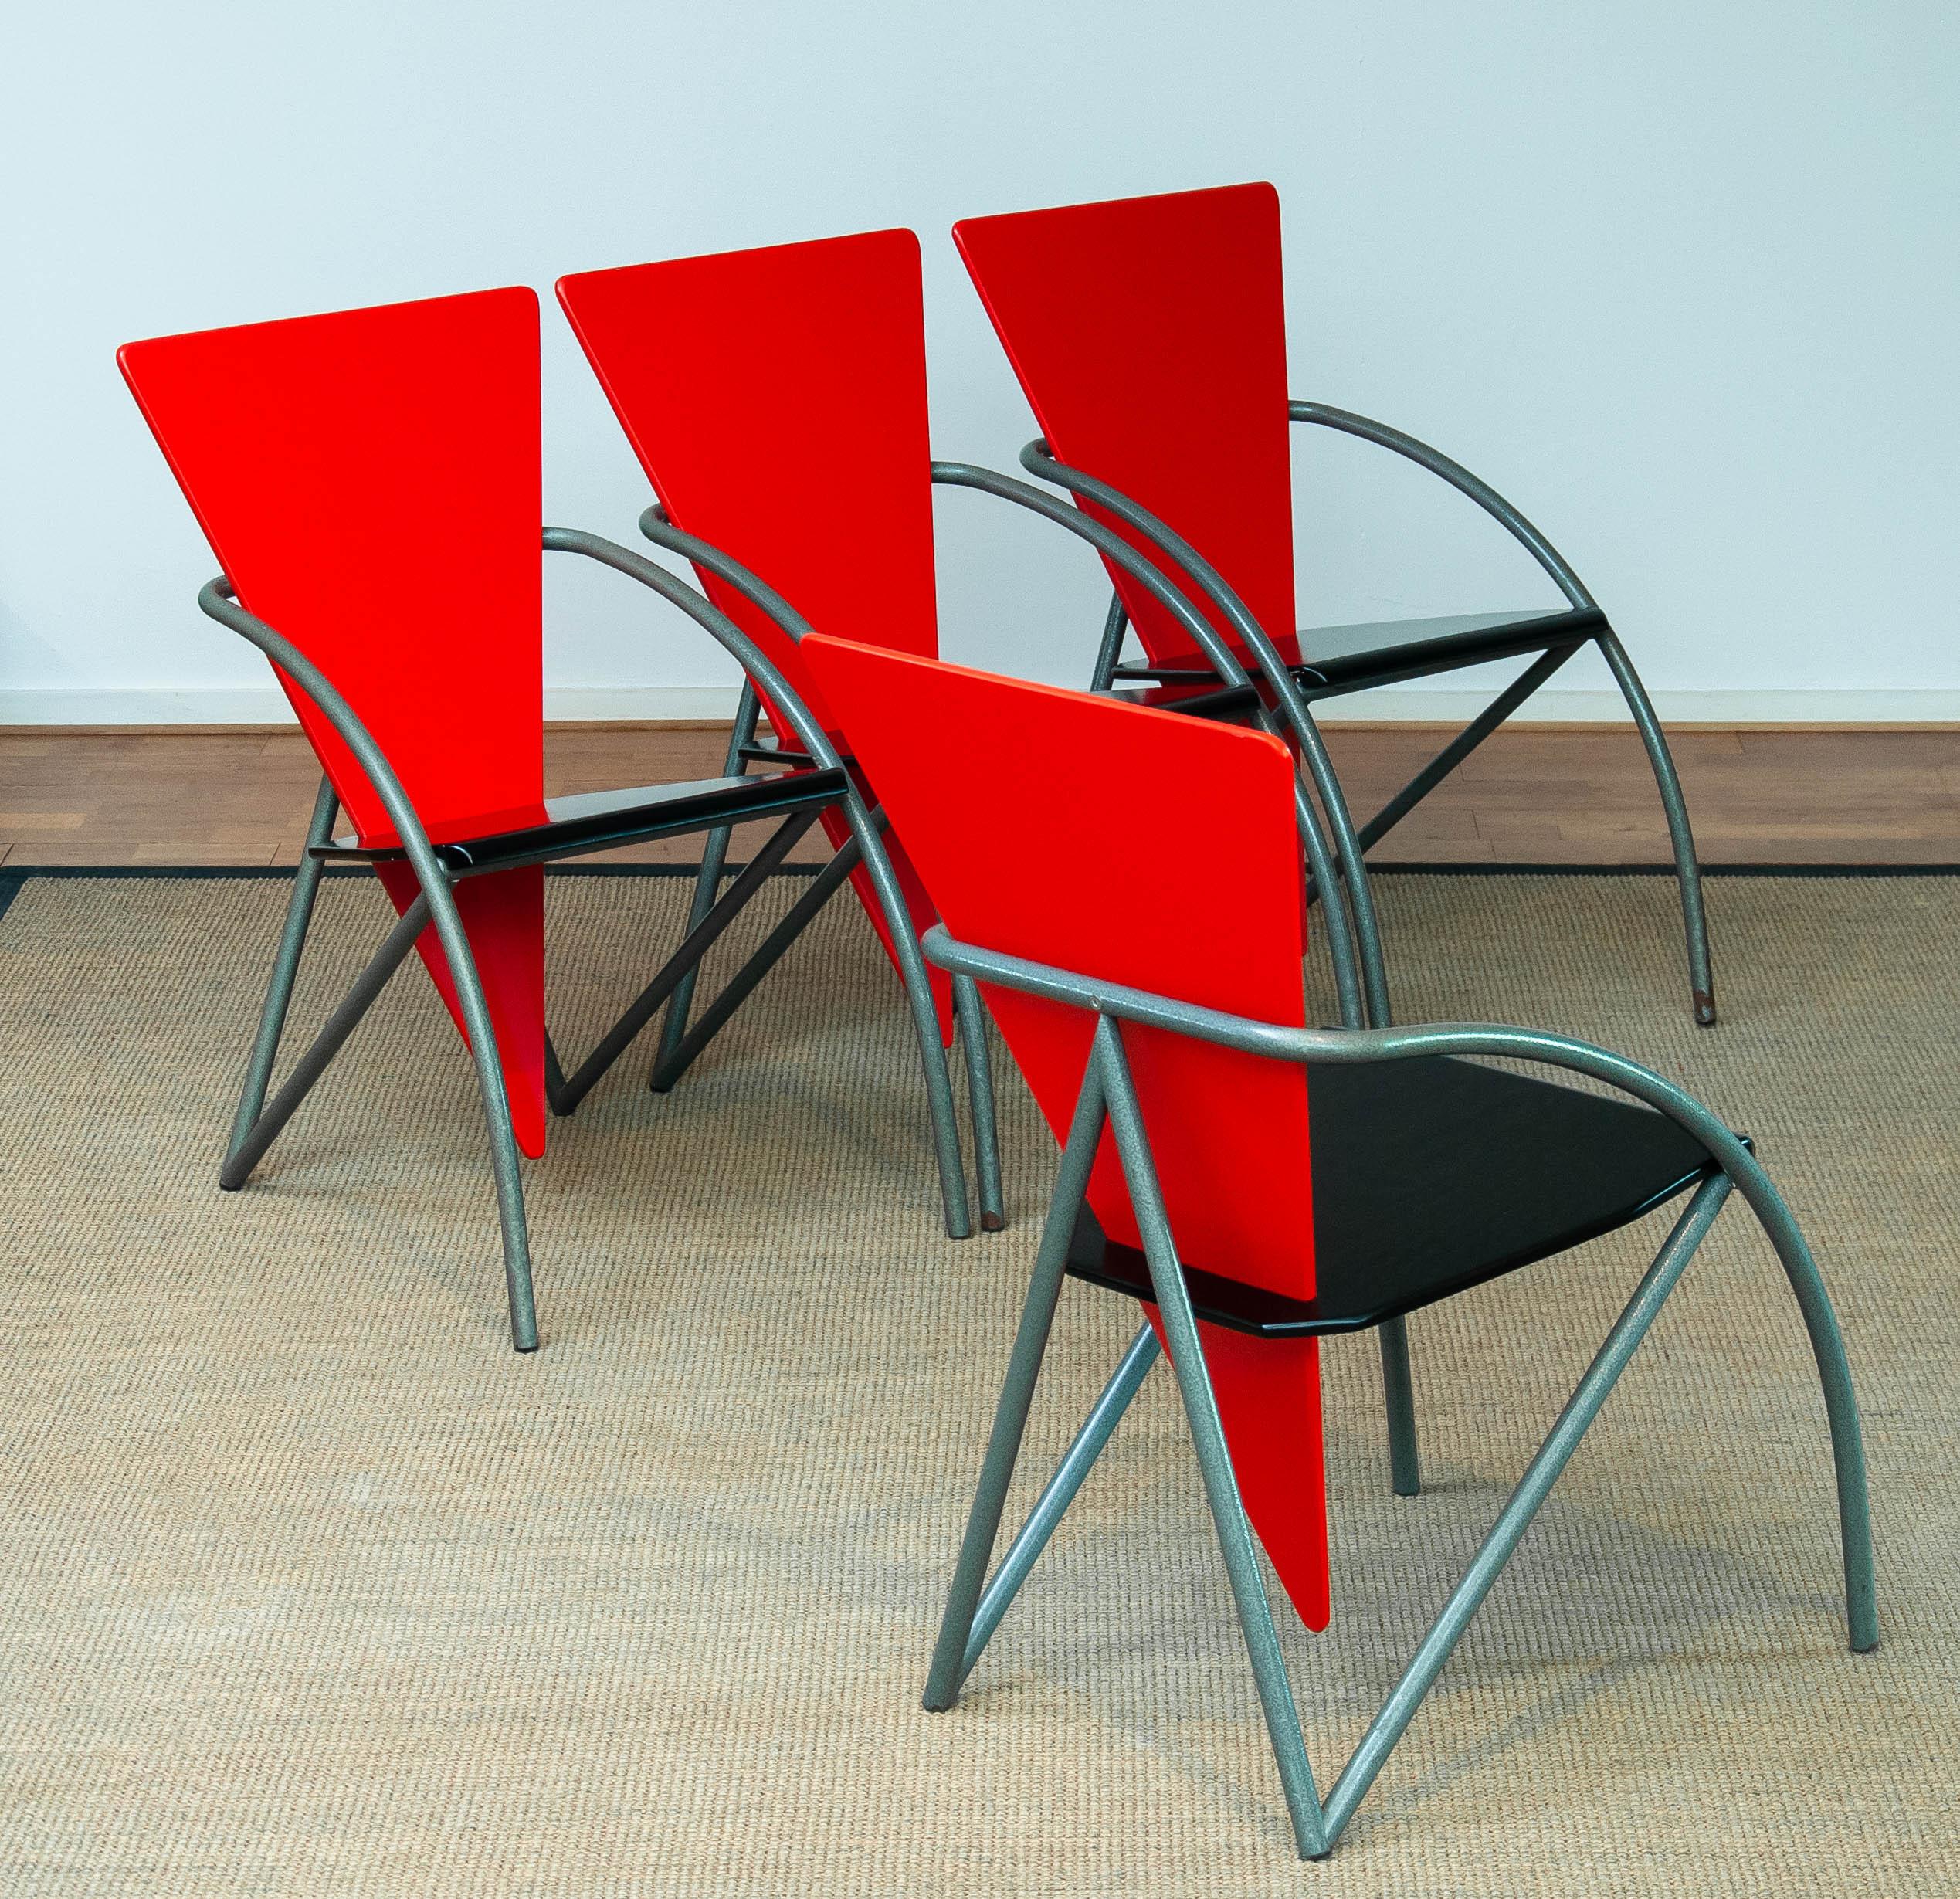 1980's Post-Modern Dining / Office Chairs in Red and Black by Klaus Wettergren In Good Condition For Sale In Silvolde, Gelderland